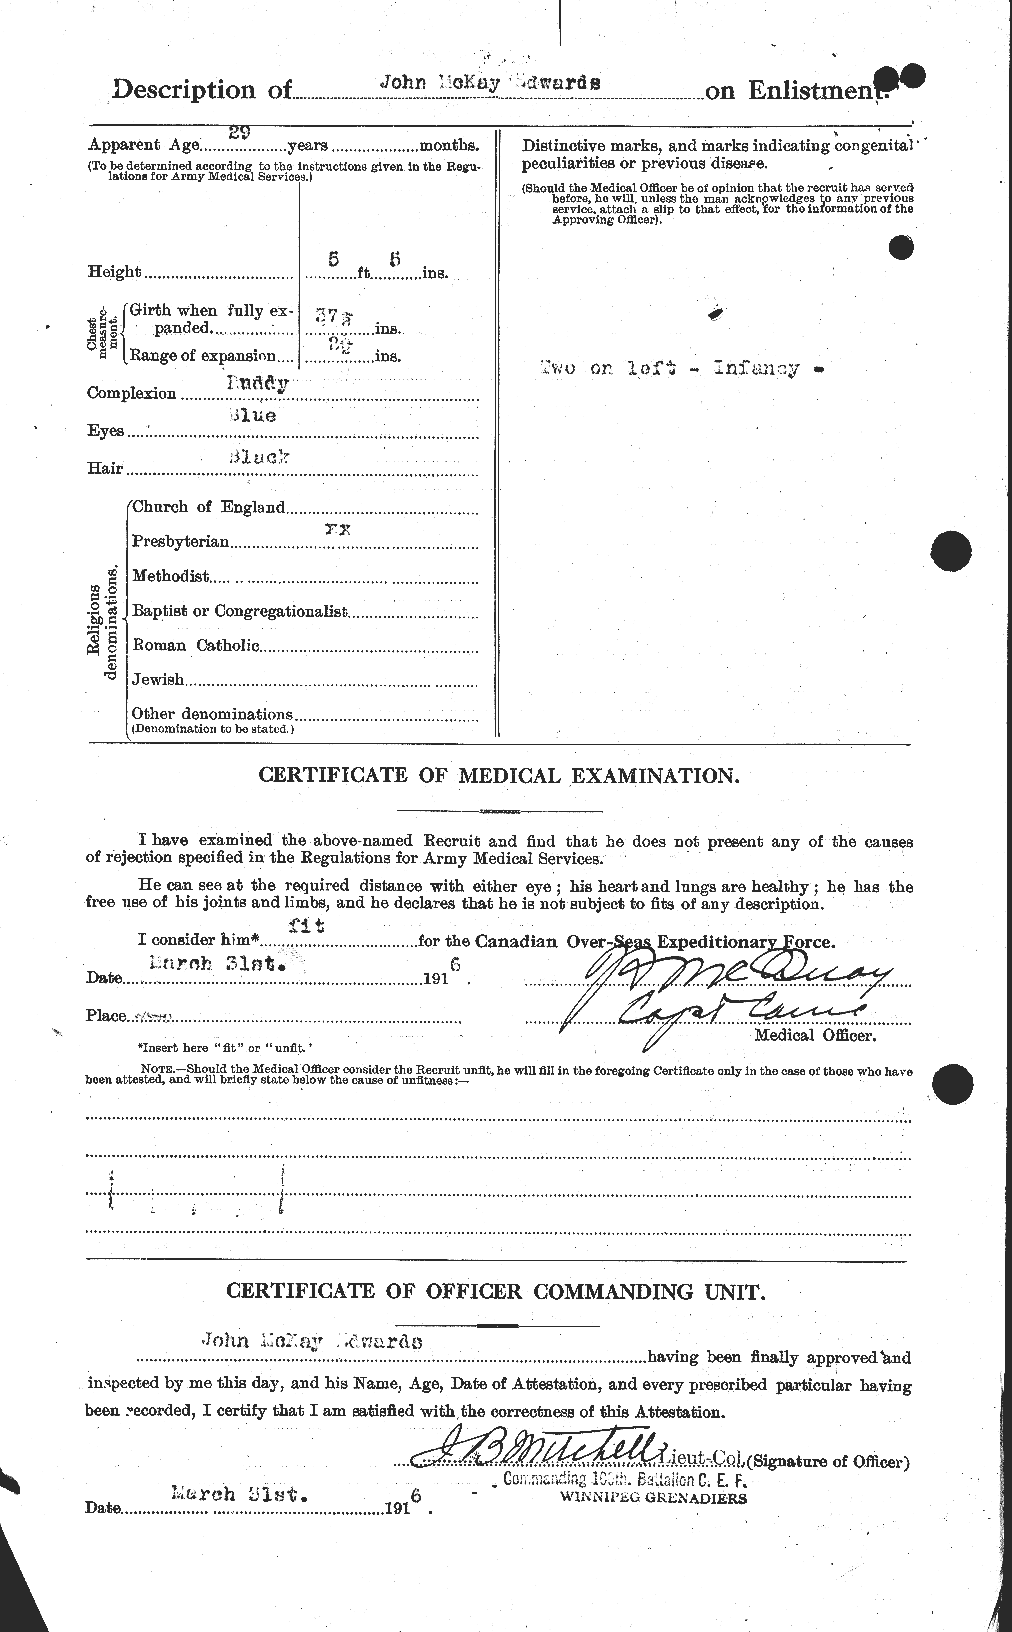 Personnel Records of the First World War - CEF 310147b